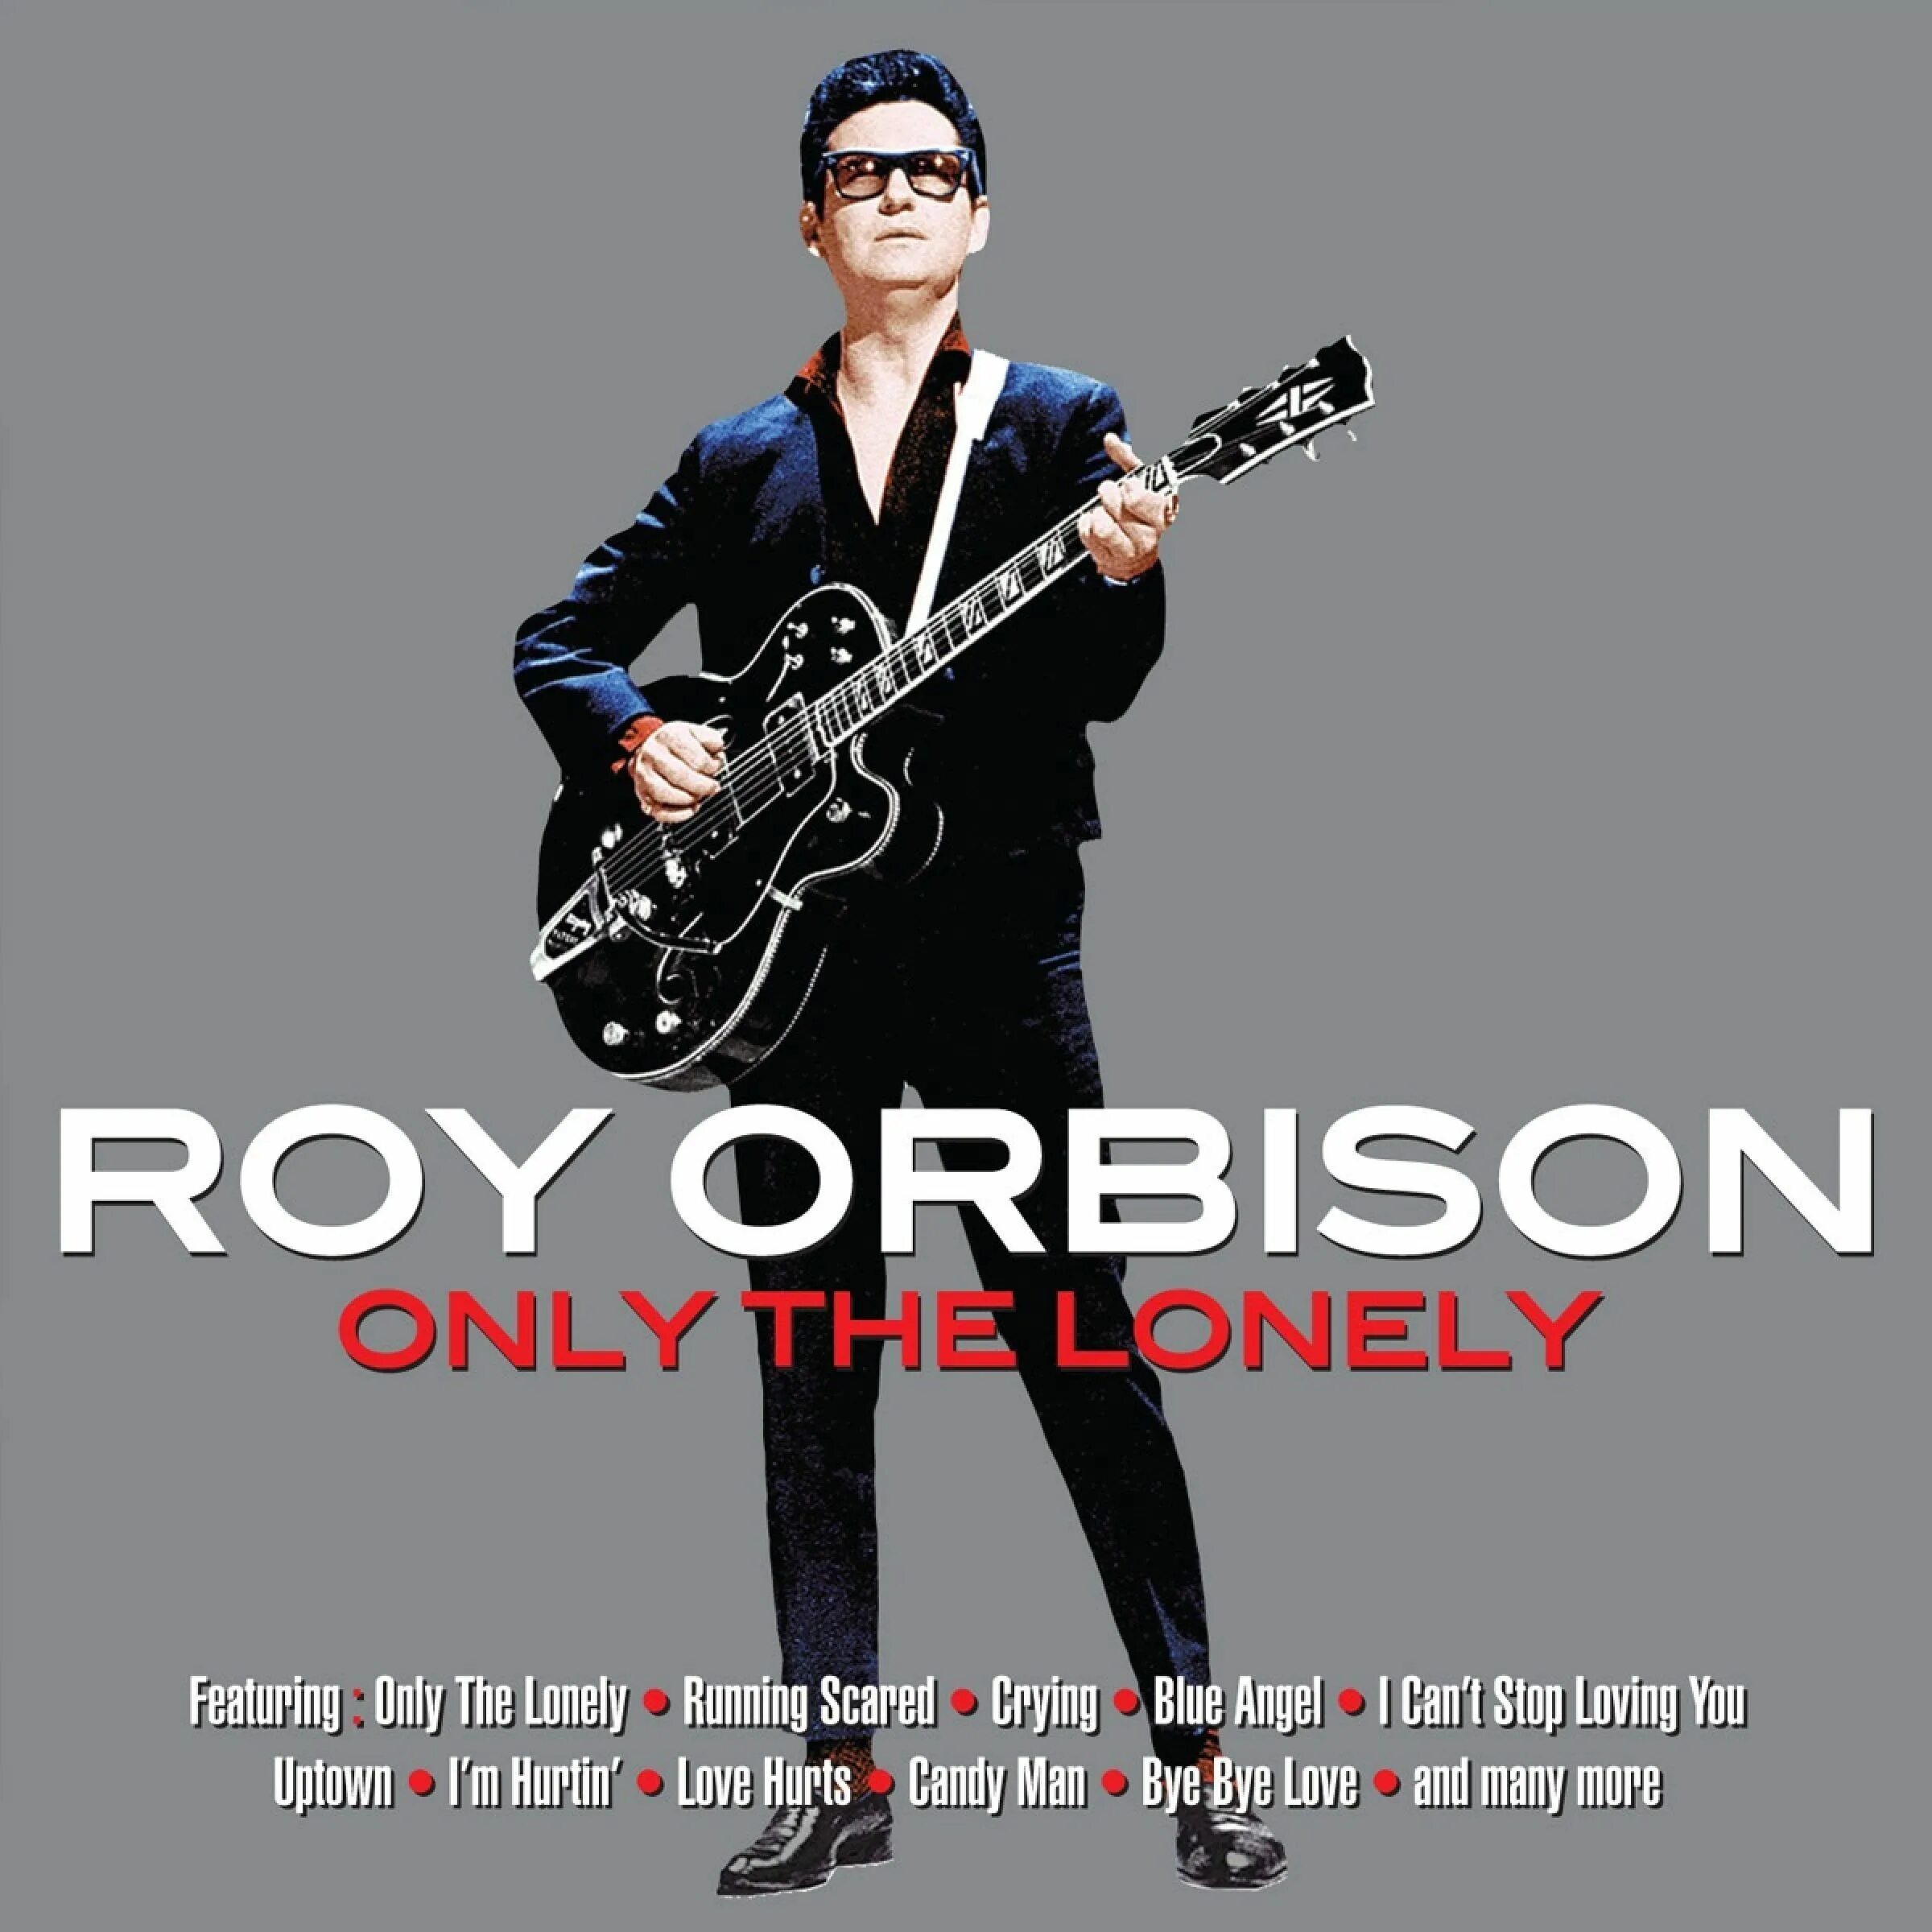 Roy Orbison only the Lonely. Lonely only. Roy Orbison Loneliness. Roy Orbison logo. Only the lonely